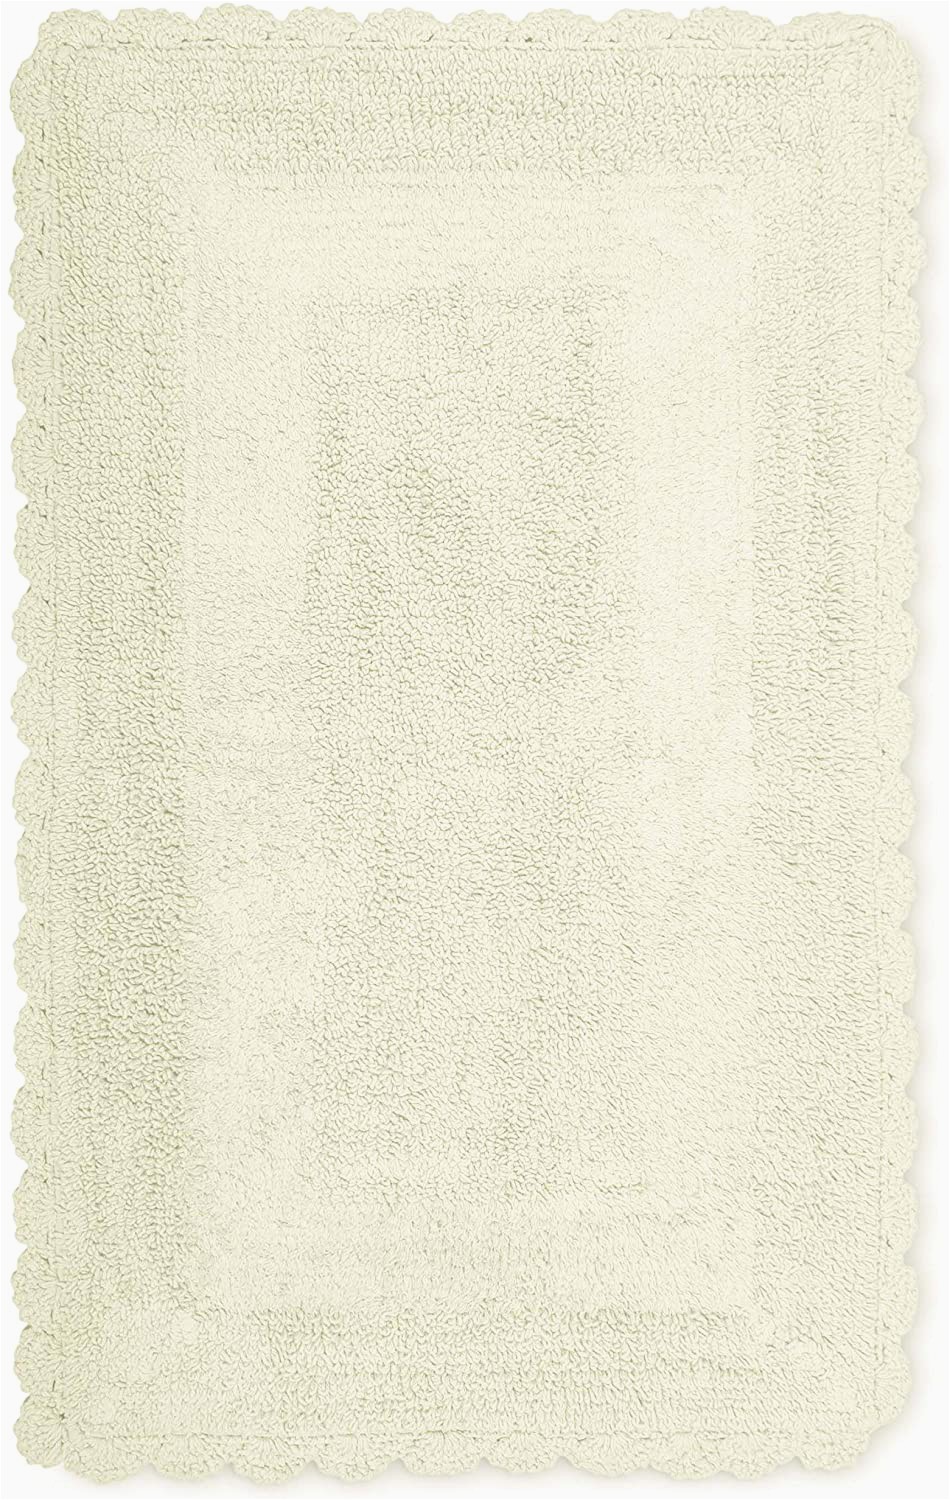 Better Homes and Gardens Heathered Bath Rug Thick and Plush Amazon Home Sense Tapete Cotton Thick Bath Rug